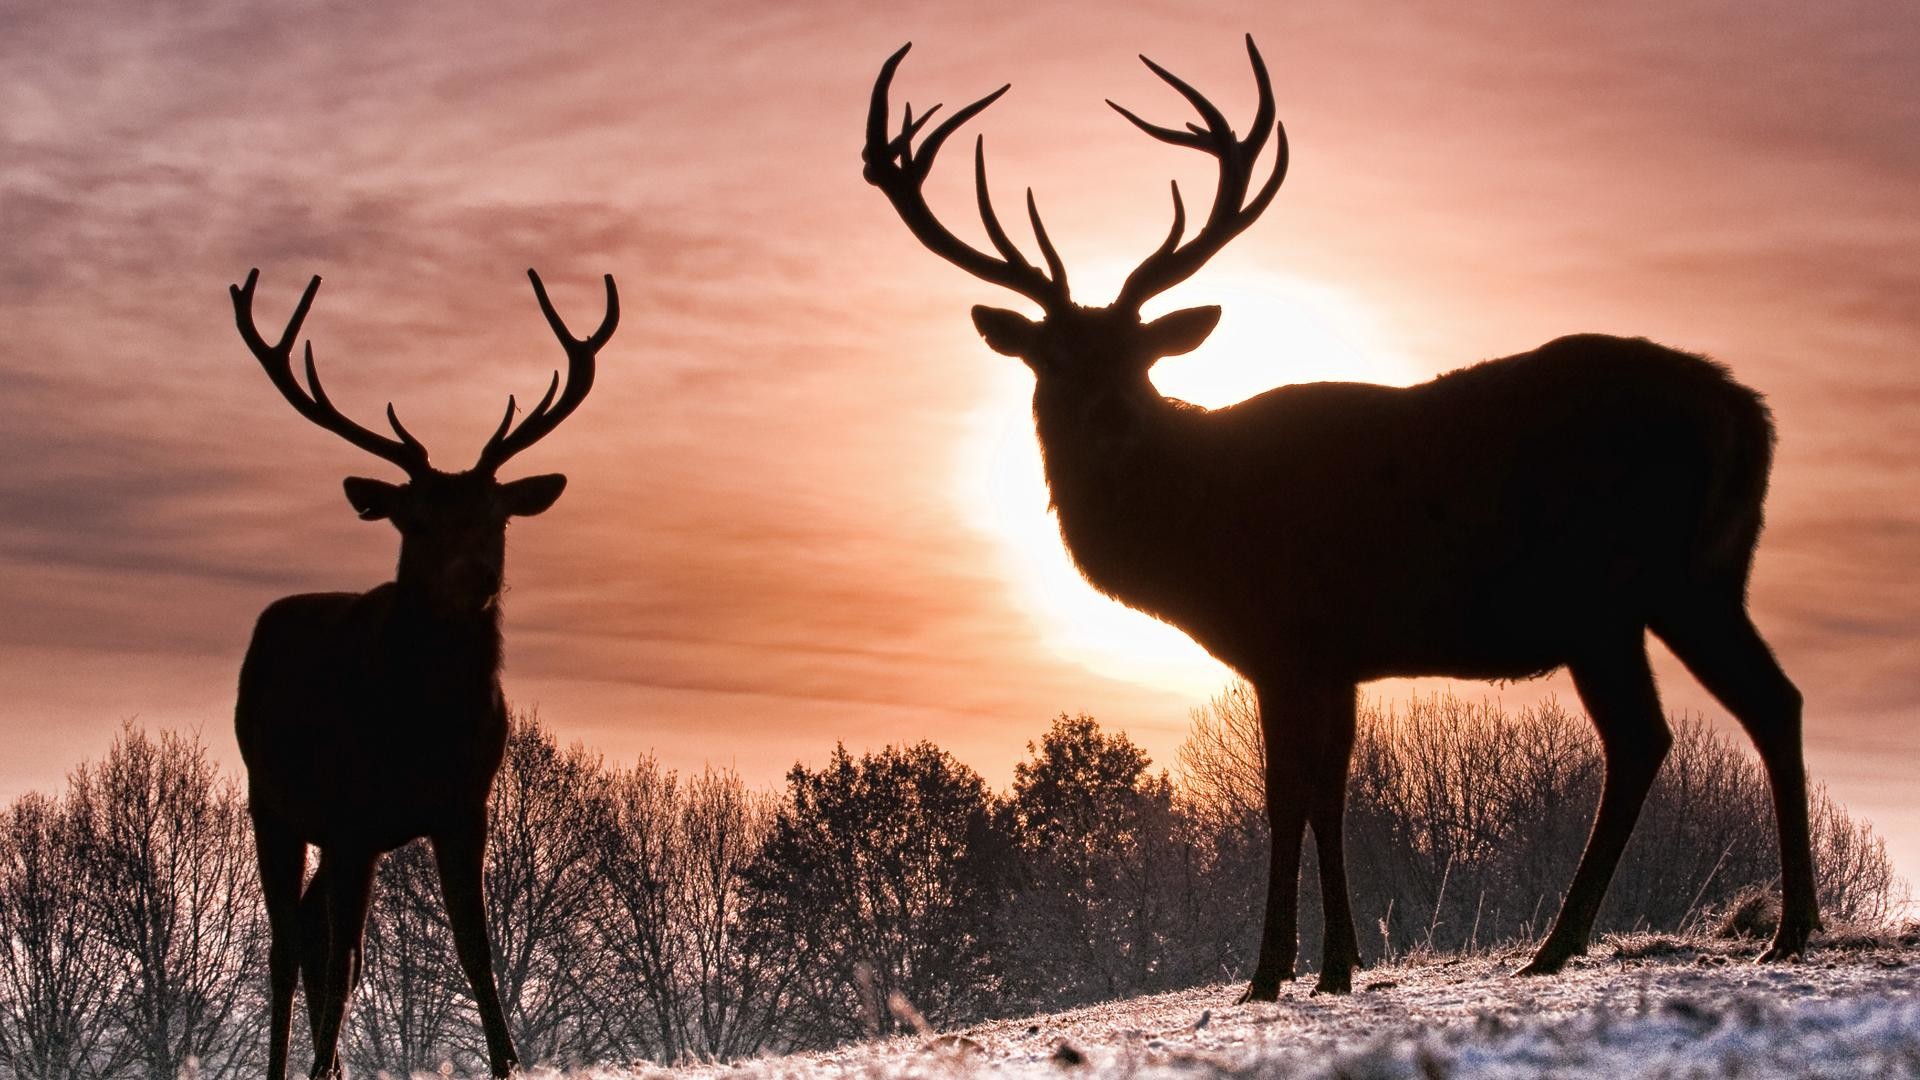 1920x1080 Whitetail Deer. Whitetail Deer Backgrounds